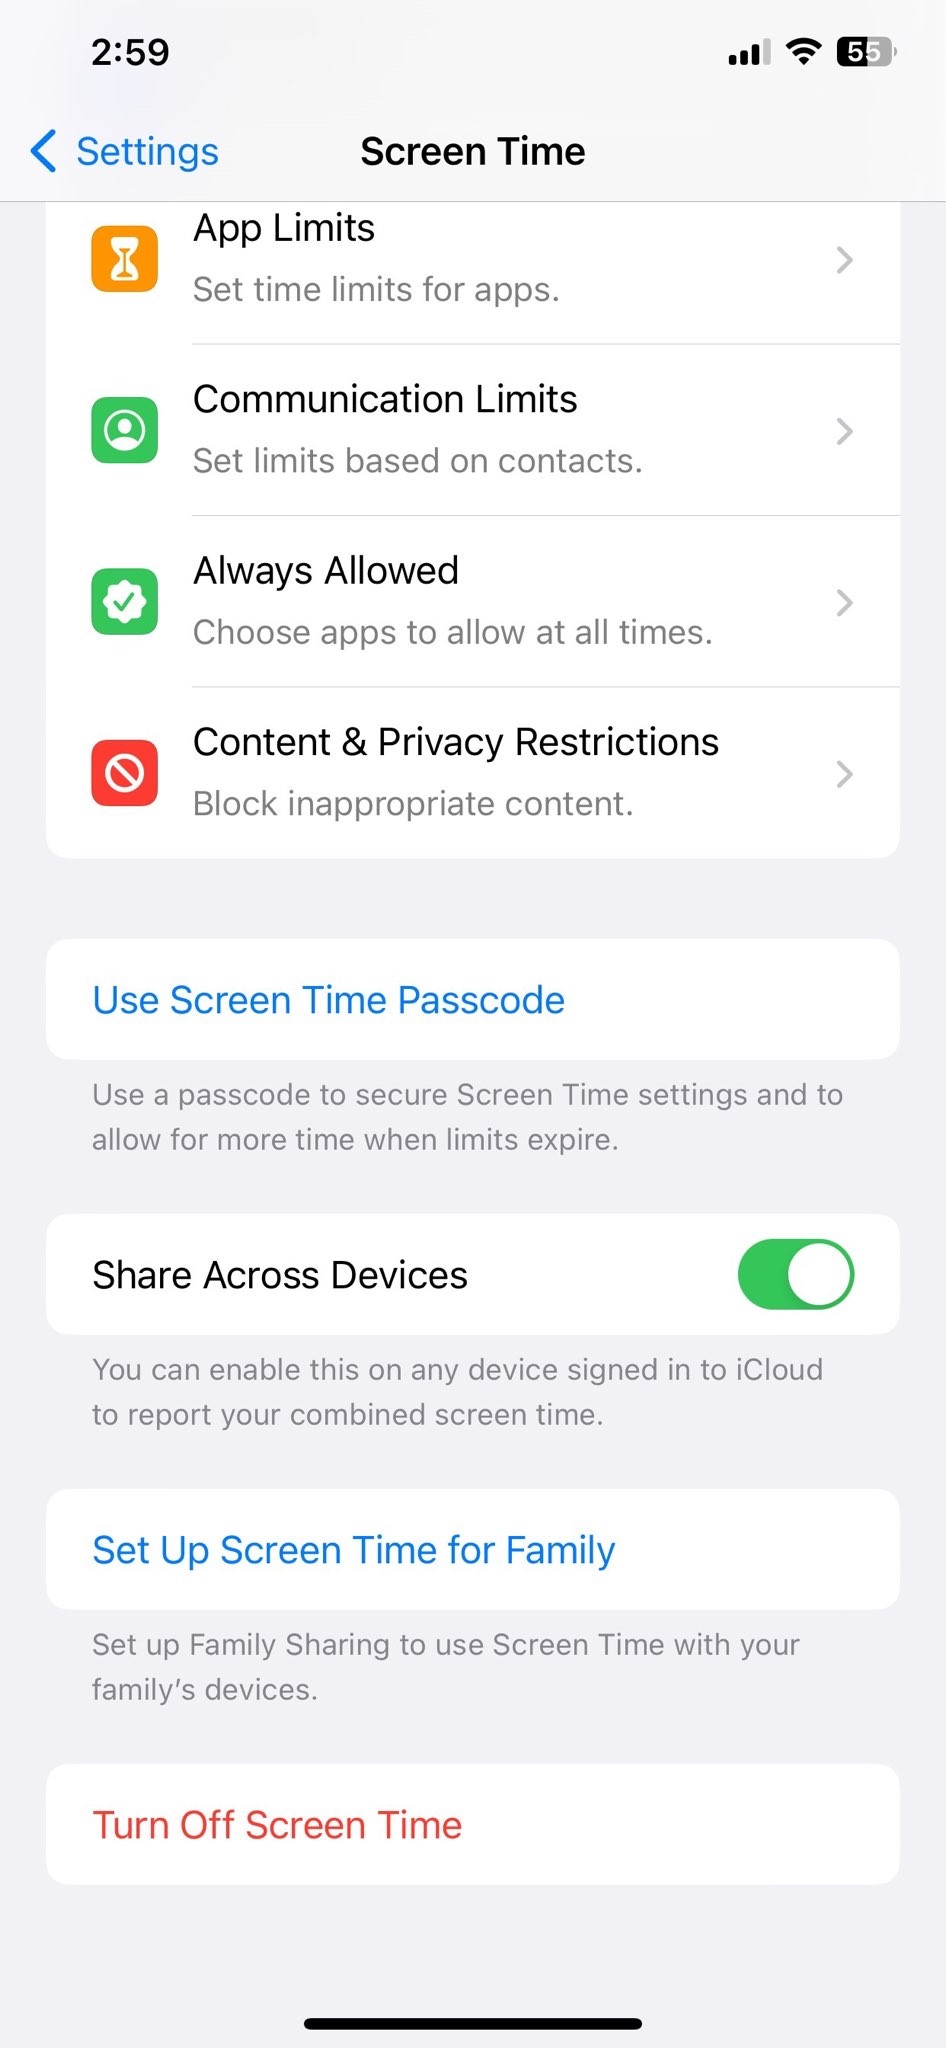 to share your Screen Time password with your family